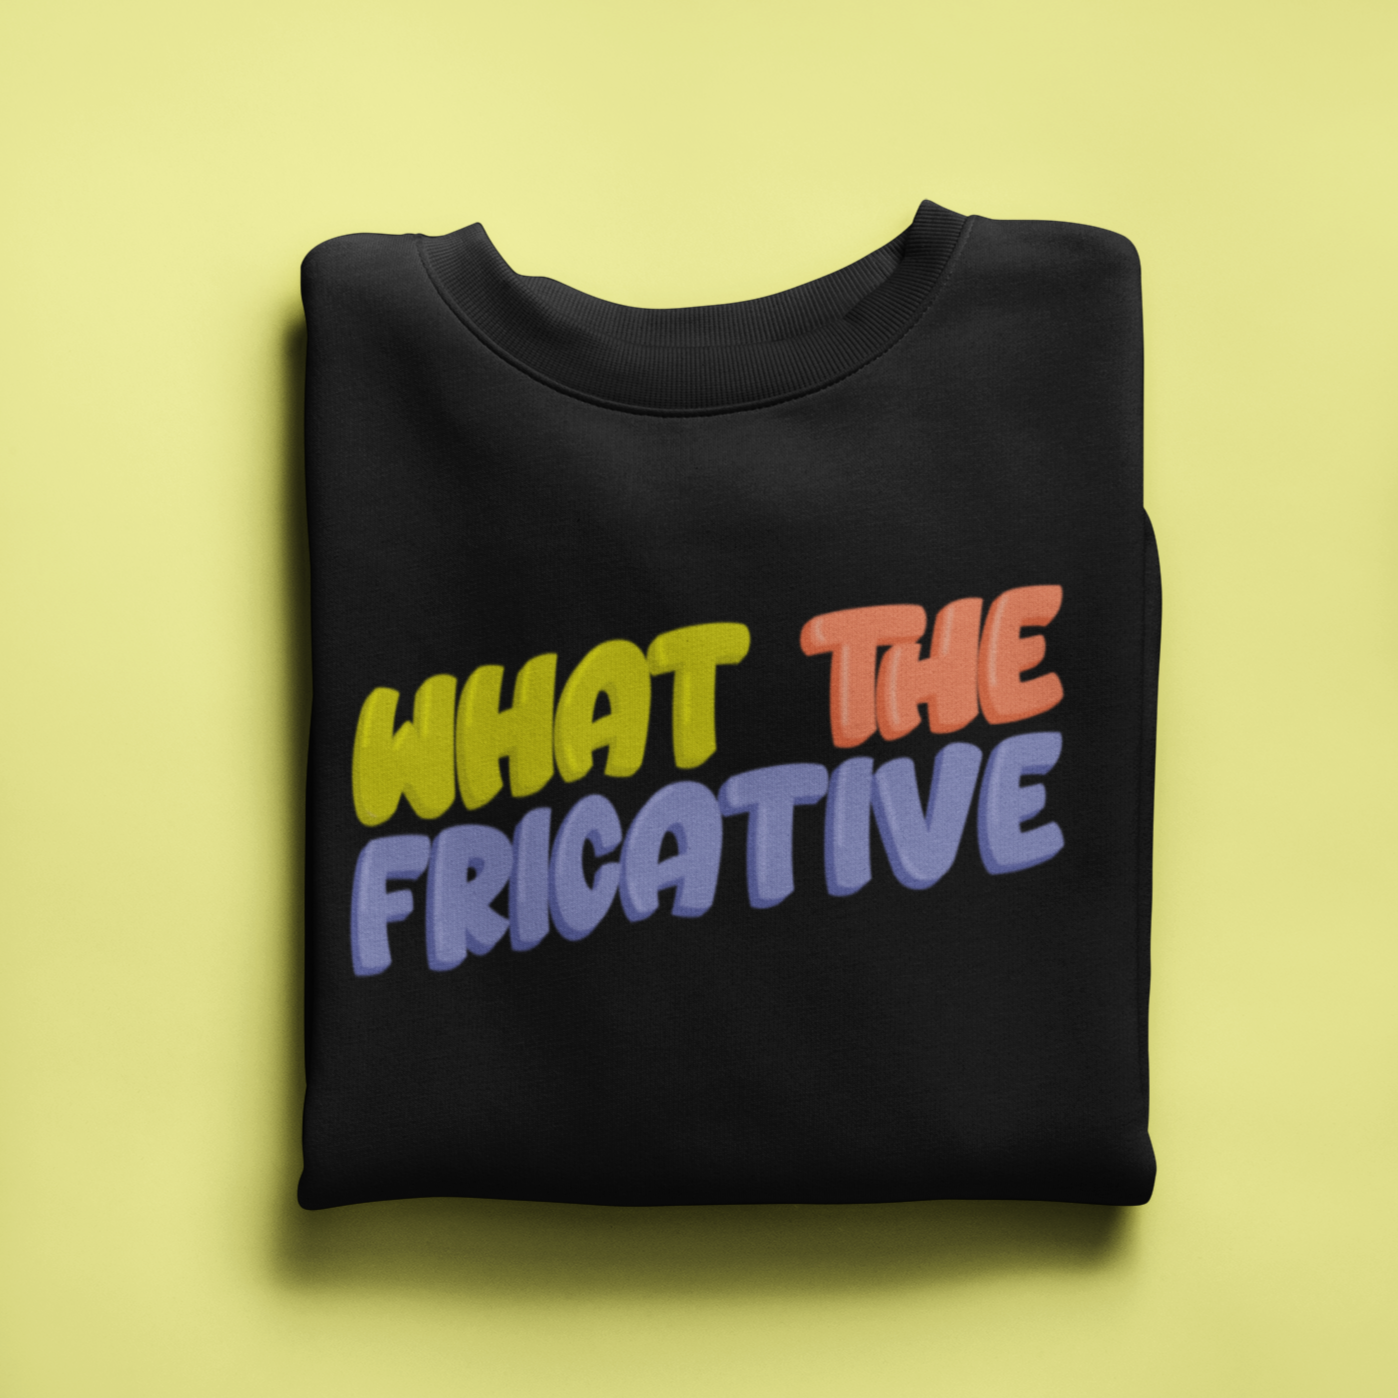 What the Fricative Crewneck